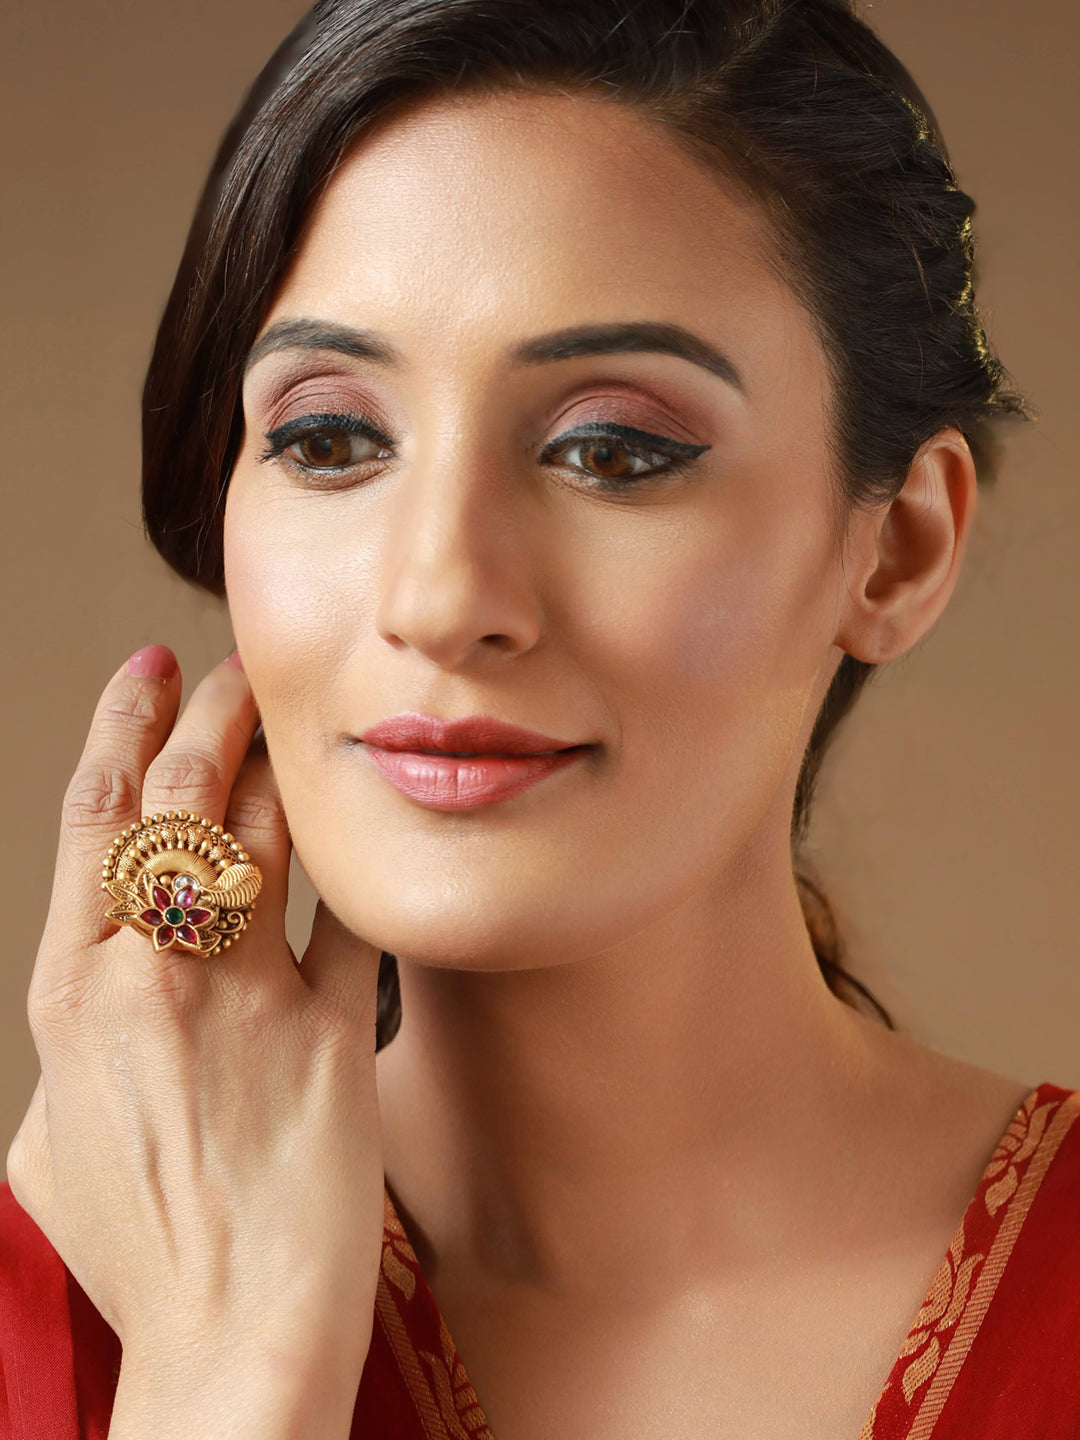 Priyaasi Studded Floral Multicolor Gold Plated Ring